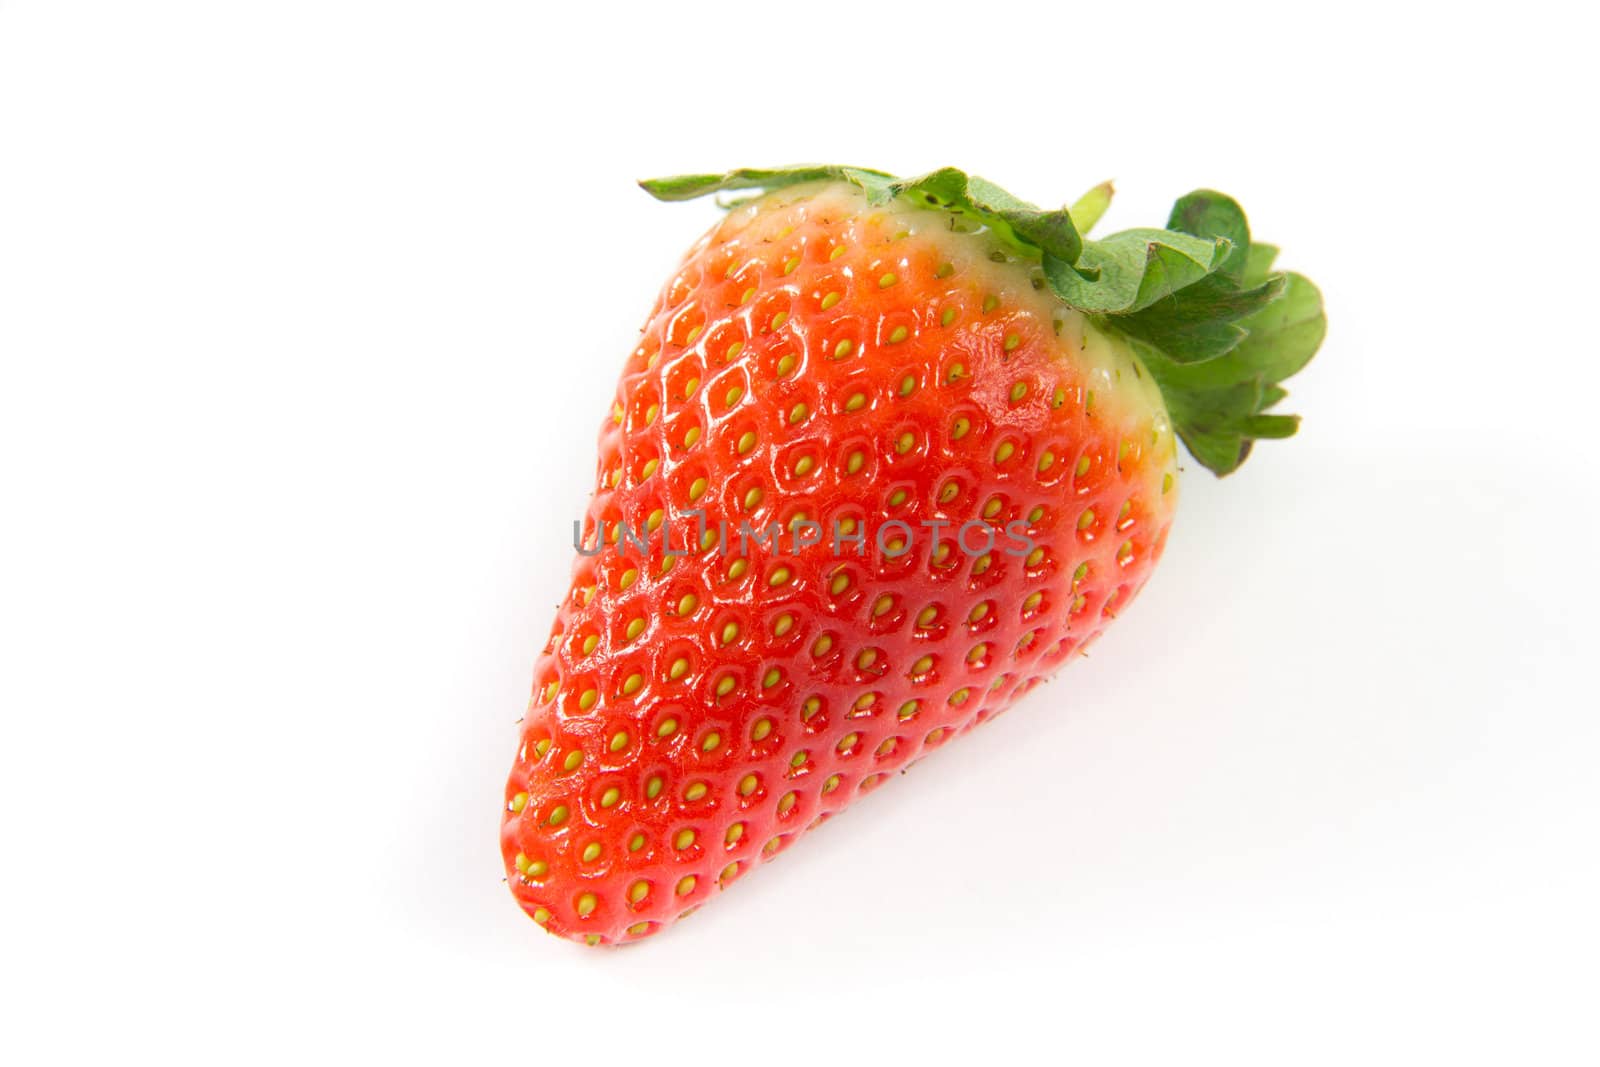 A picture of a single strawberry on a white background